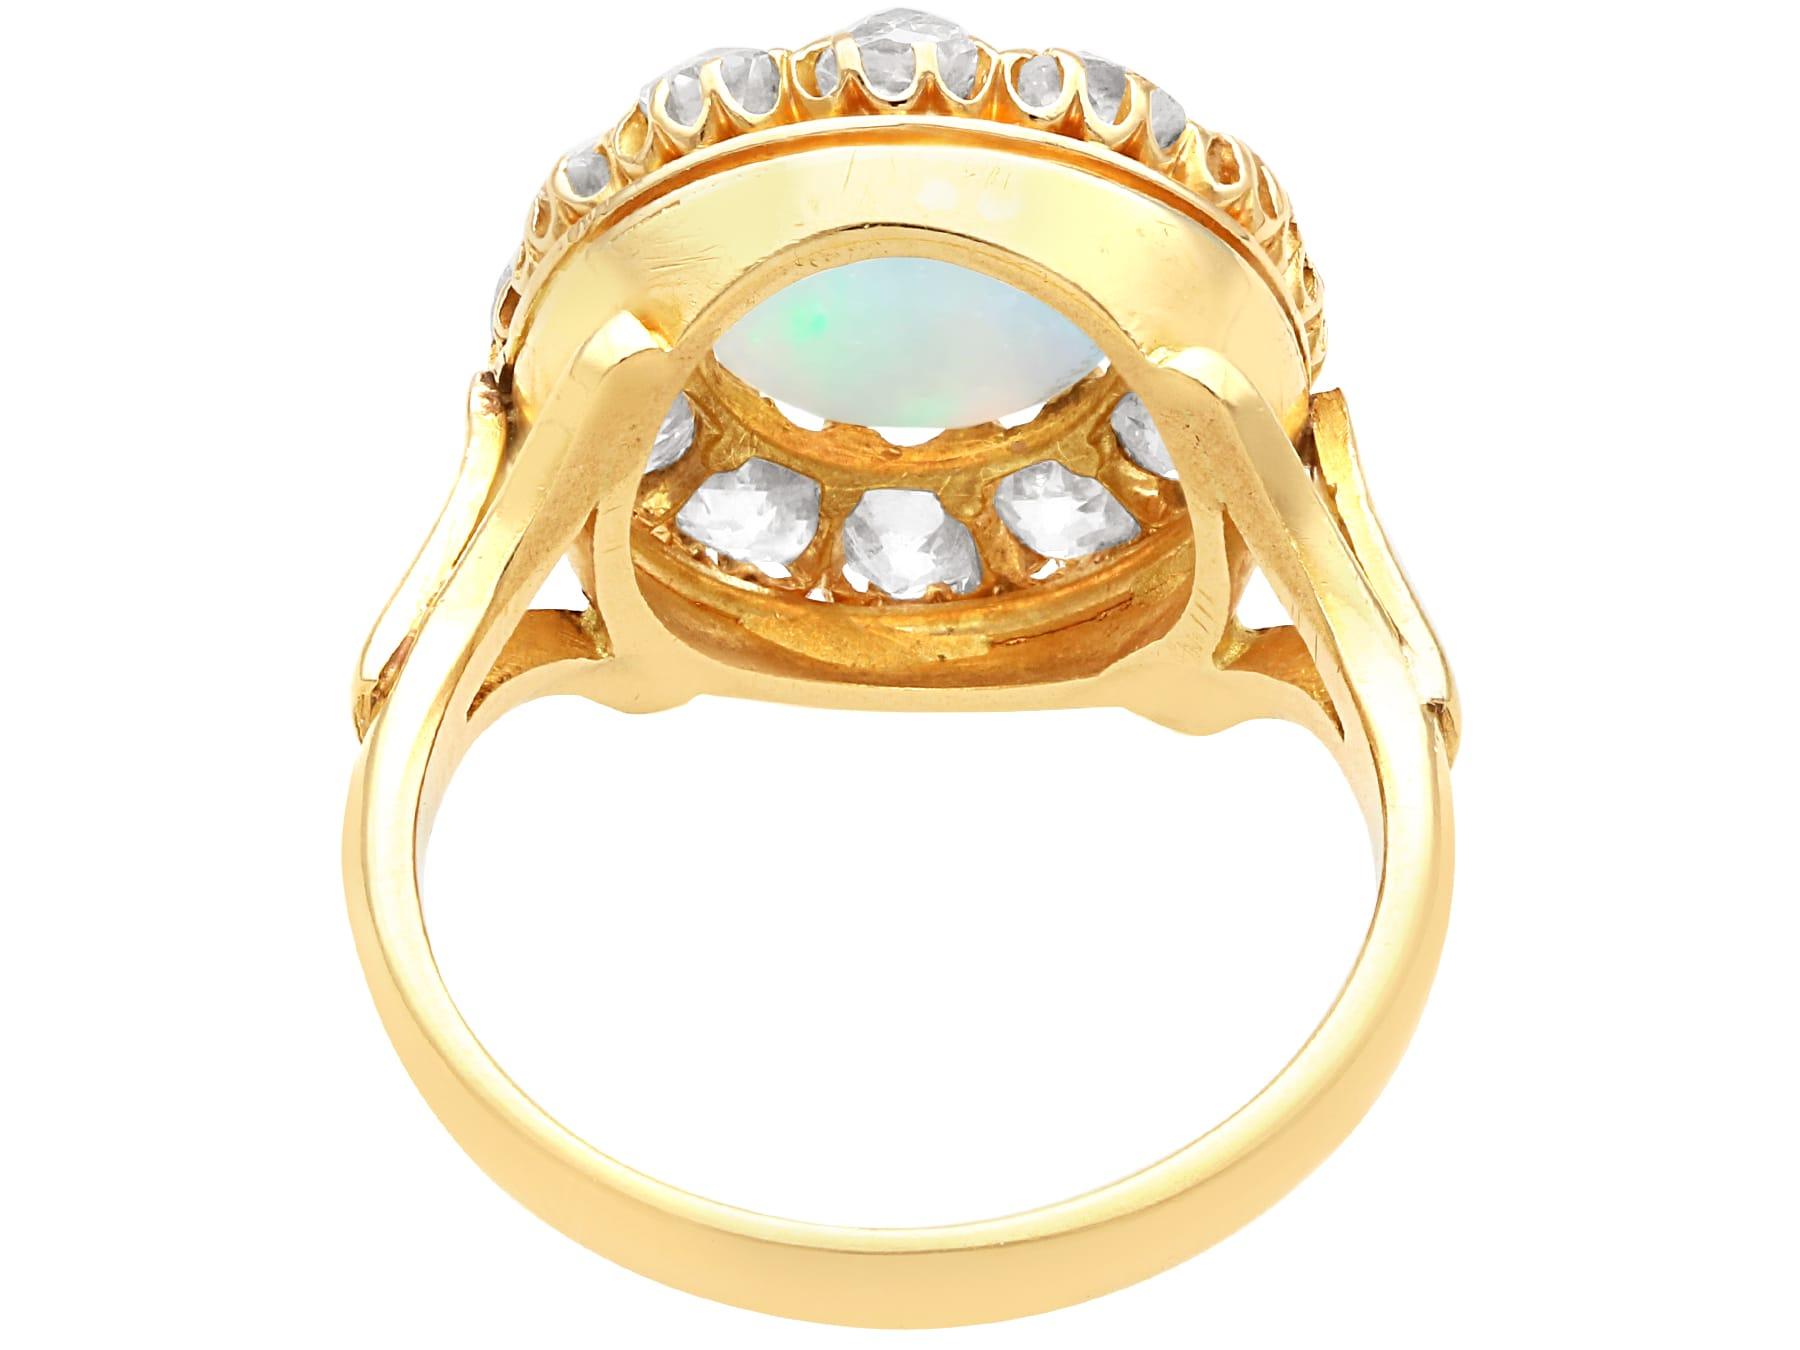 Antique 1.56 Carat Opal and 2.10 Carat Diamond 18k Yellow Gold Dress Ring  In Excellent Condition For Sale In Jesmond, Newcastle Upon Tyne